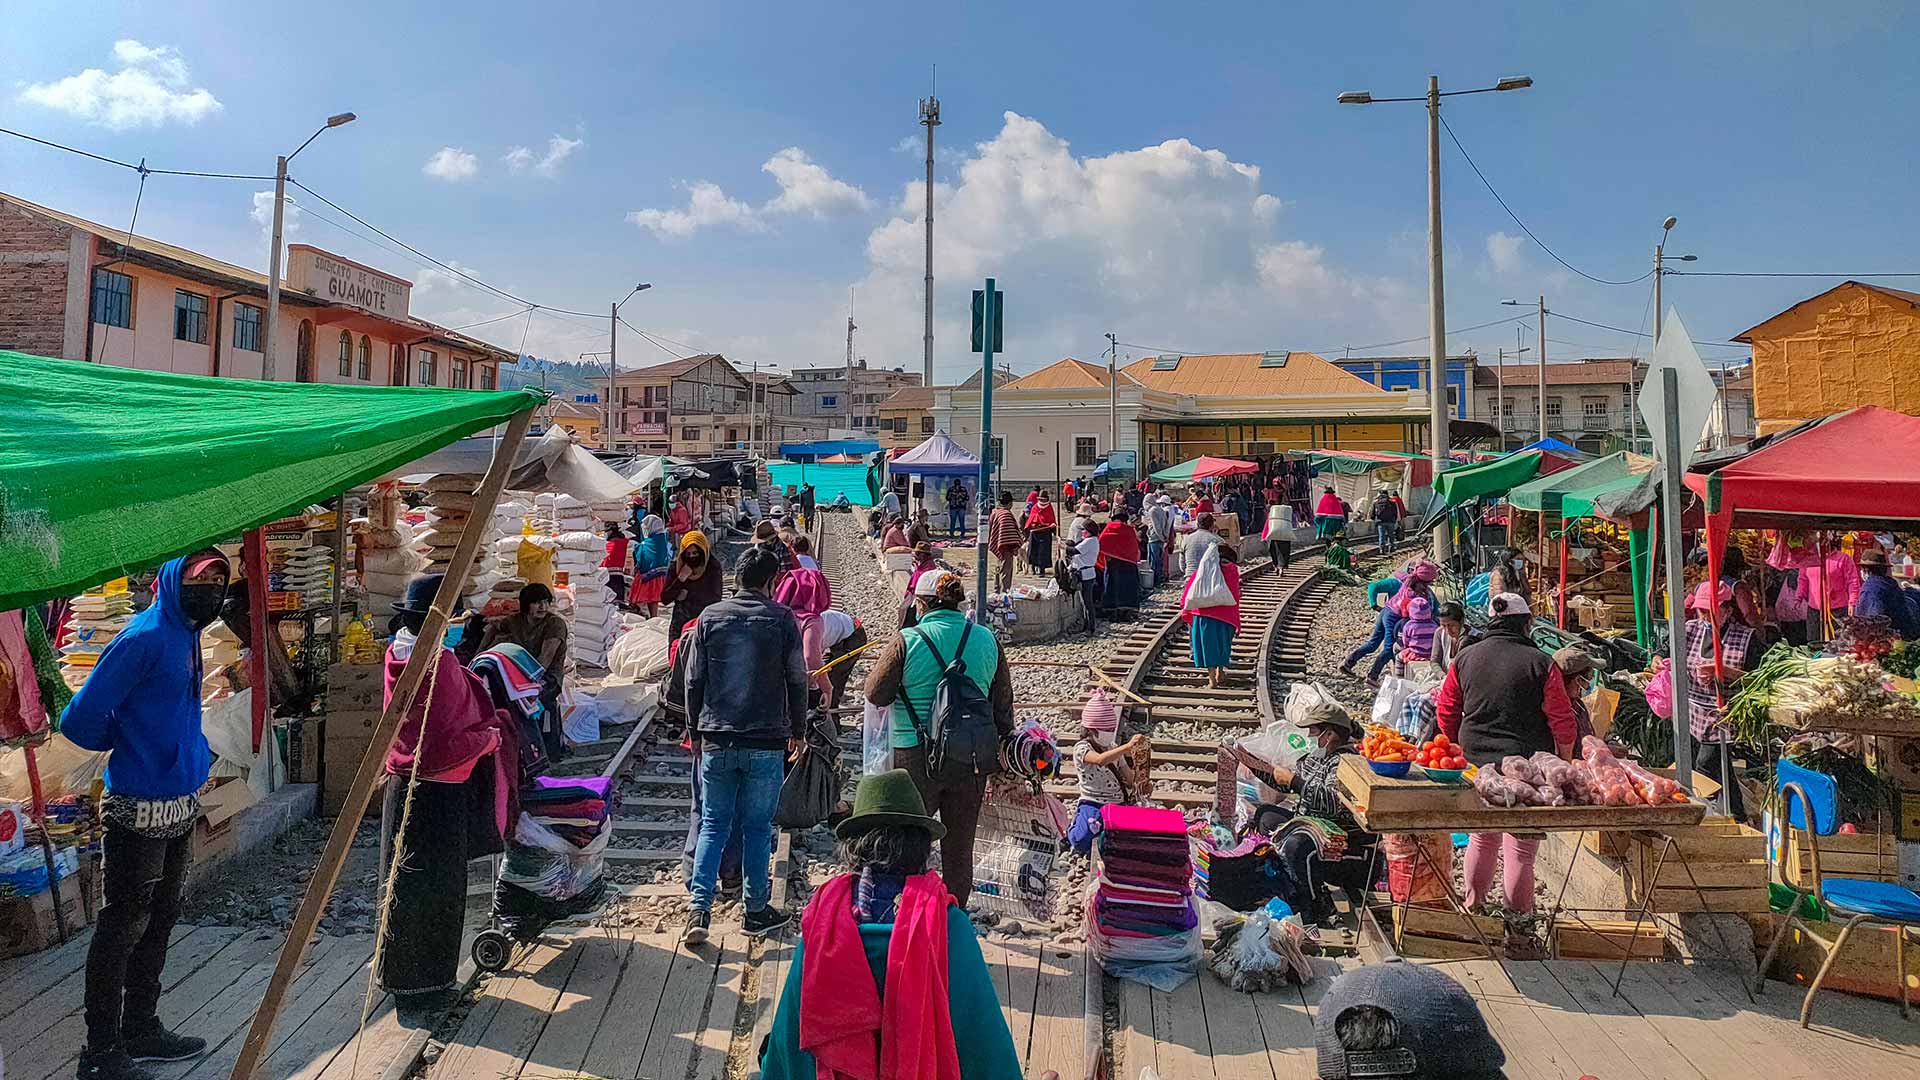 Inhabitants of the authentic and highly indigenous town of Guamote, in Chimborazo, Ecuador, are celebrating a colorful local market on the railway. Impactful Travel